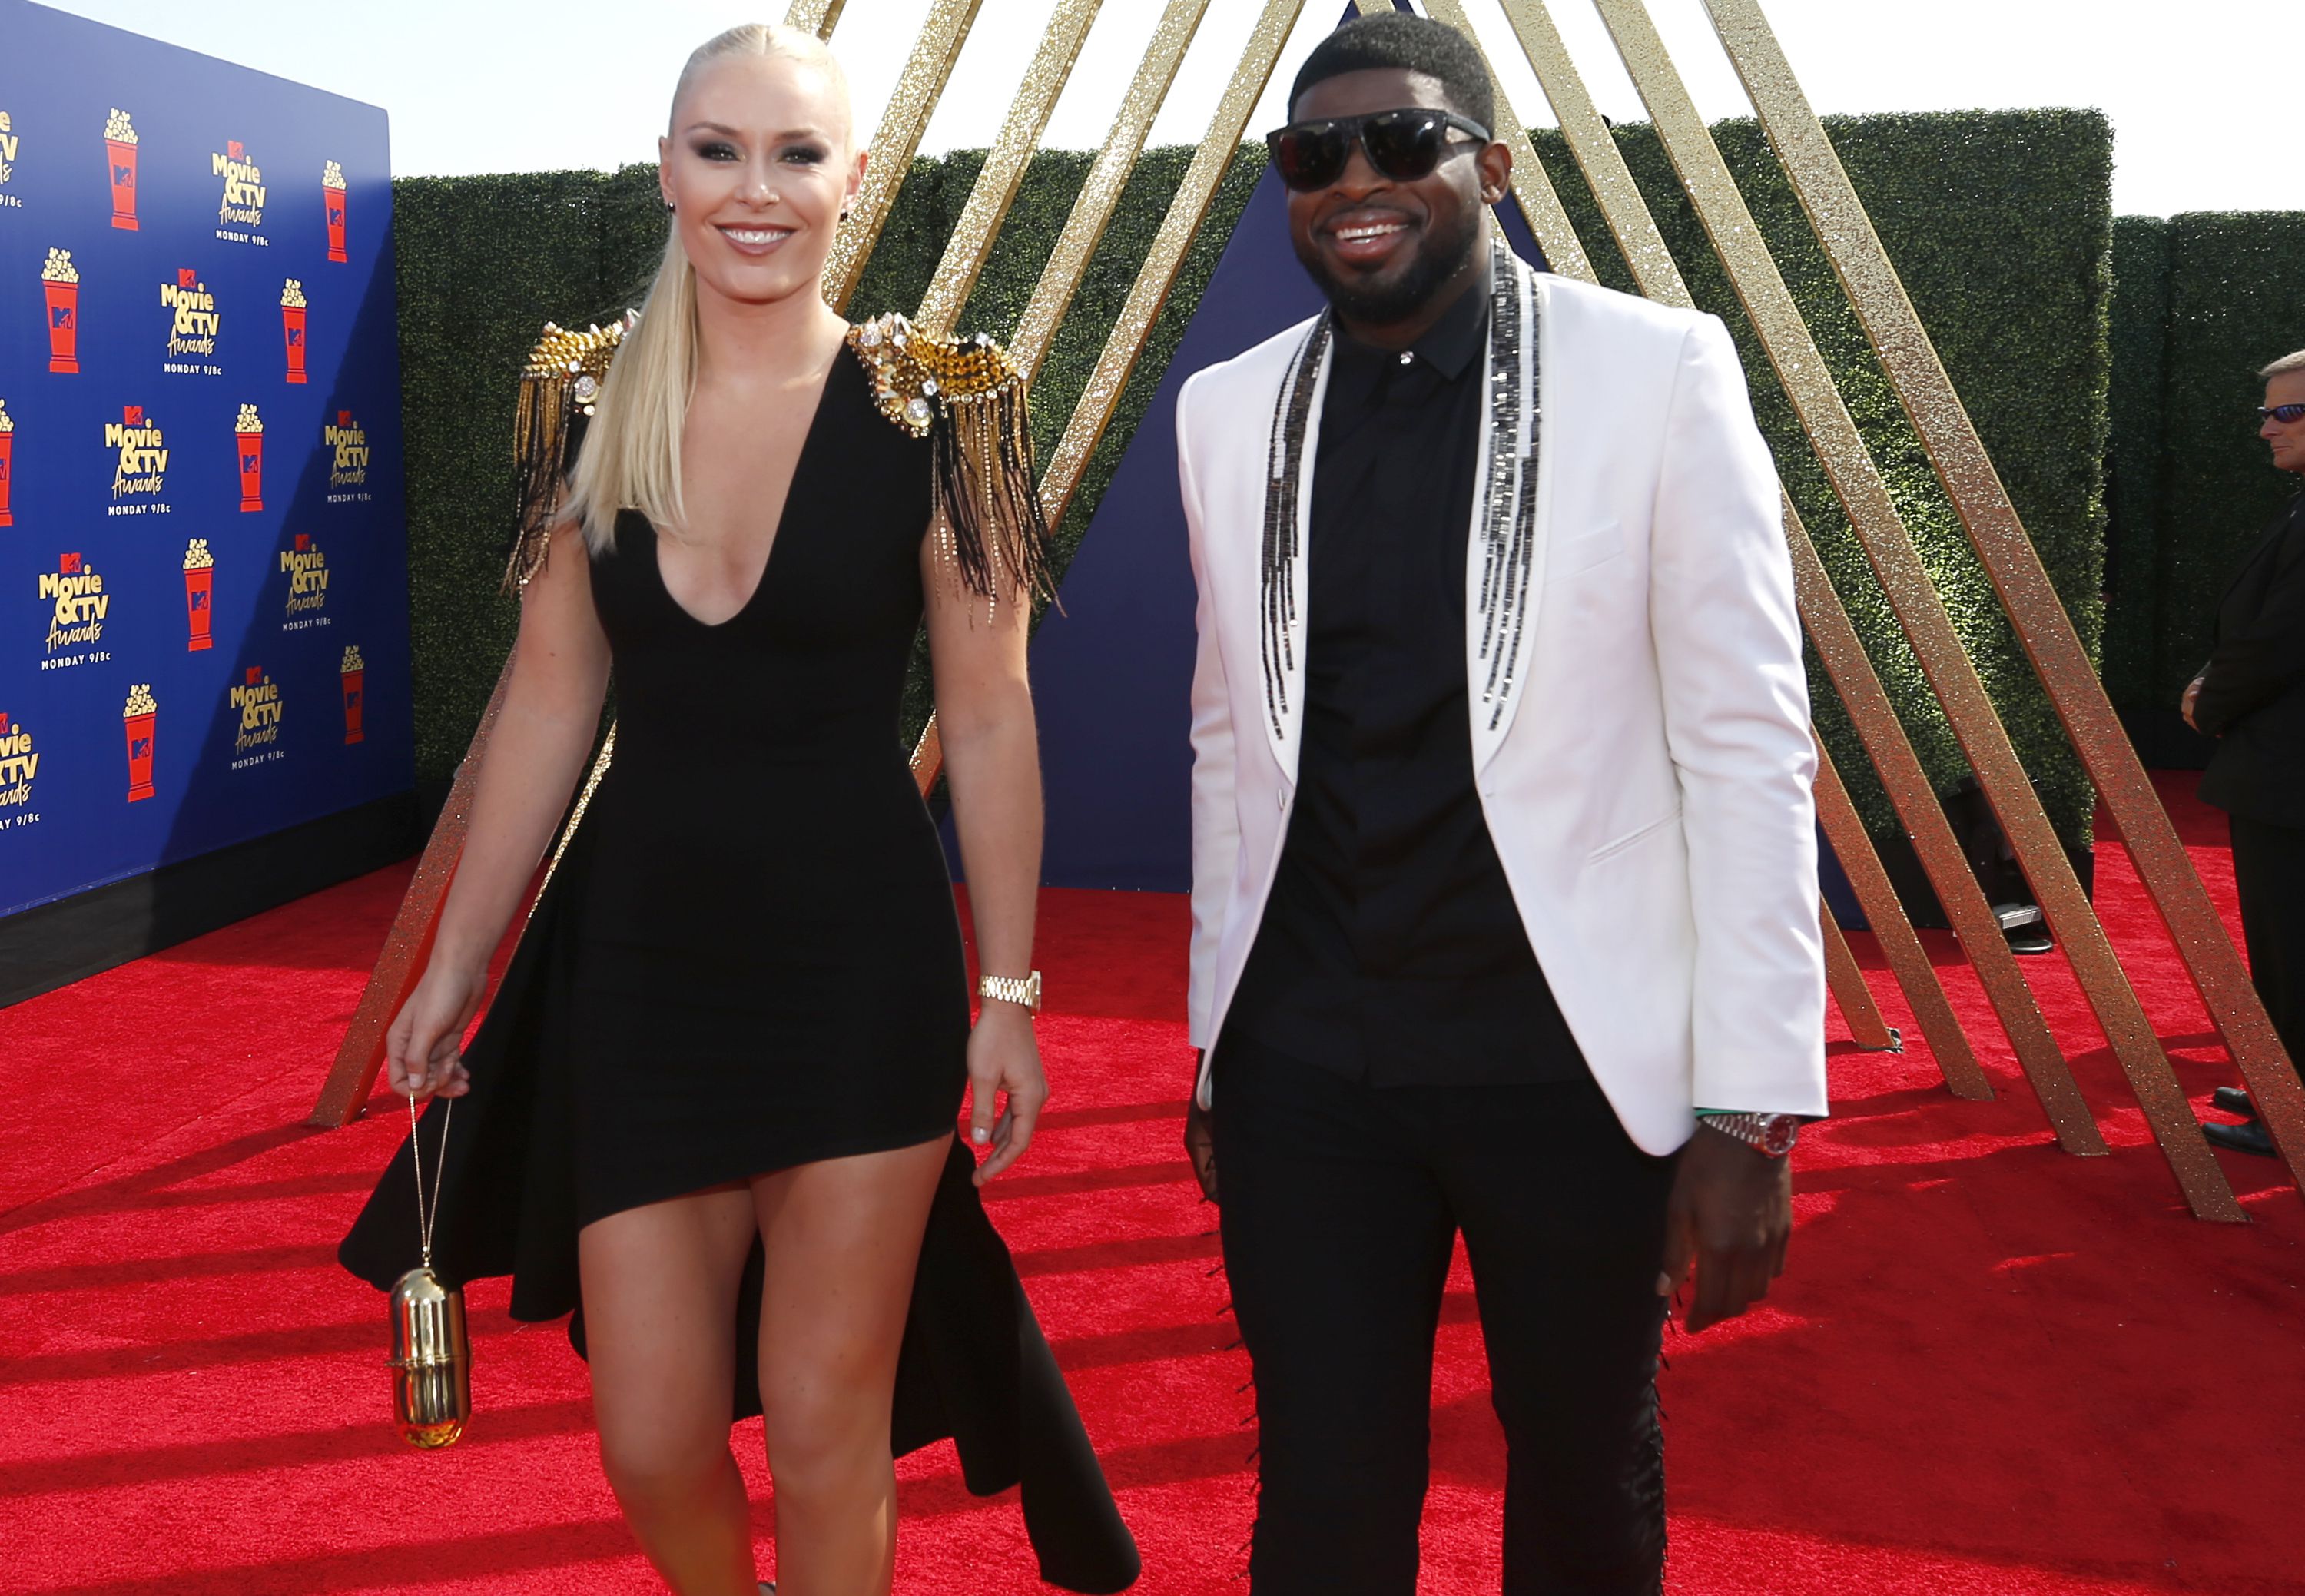 Olympic Skier Lindsey Vonn Is Engaged to New Jersey Devils' Hockey Player P.K.  Subban